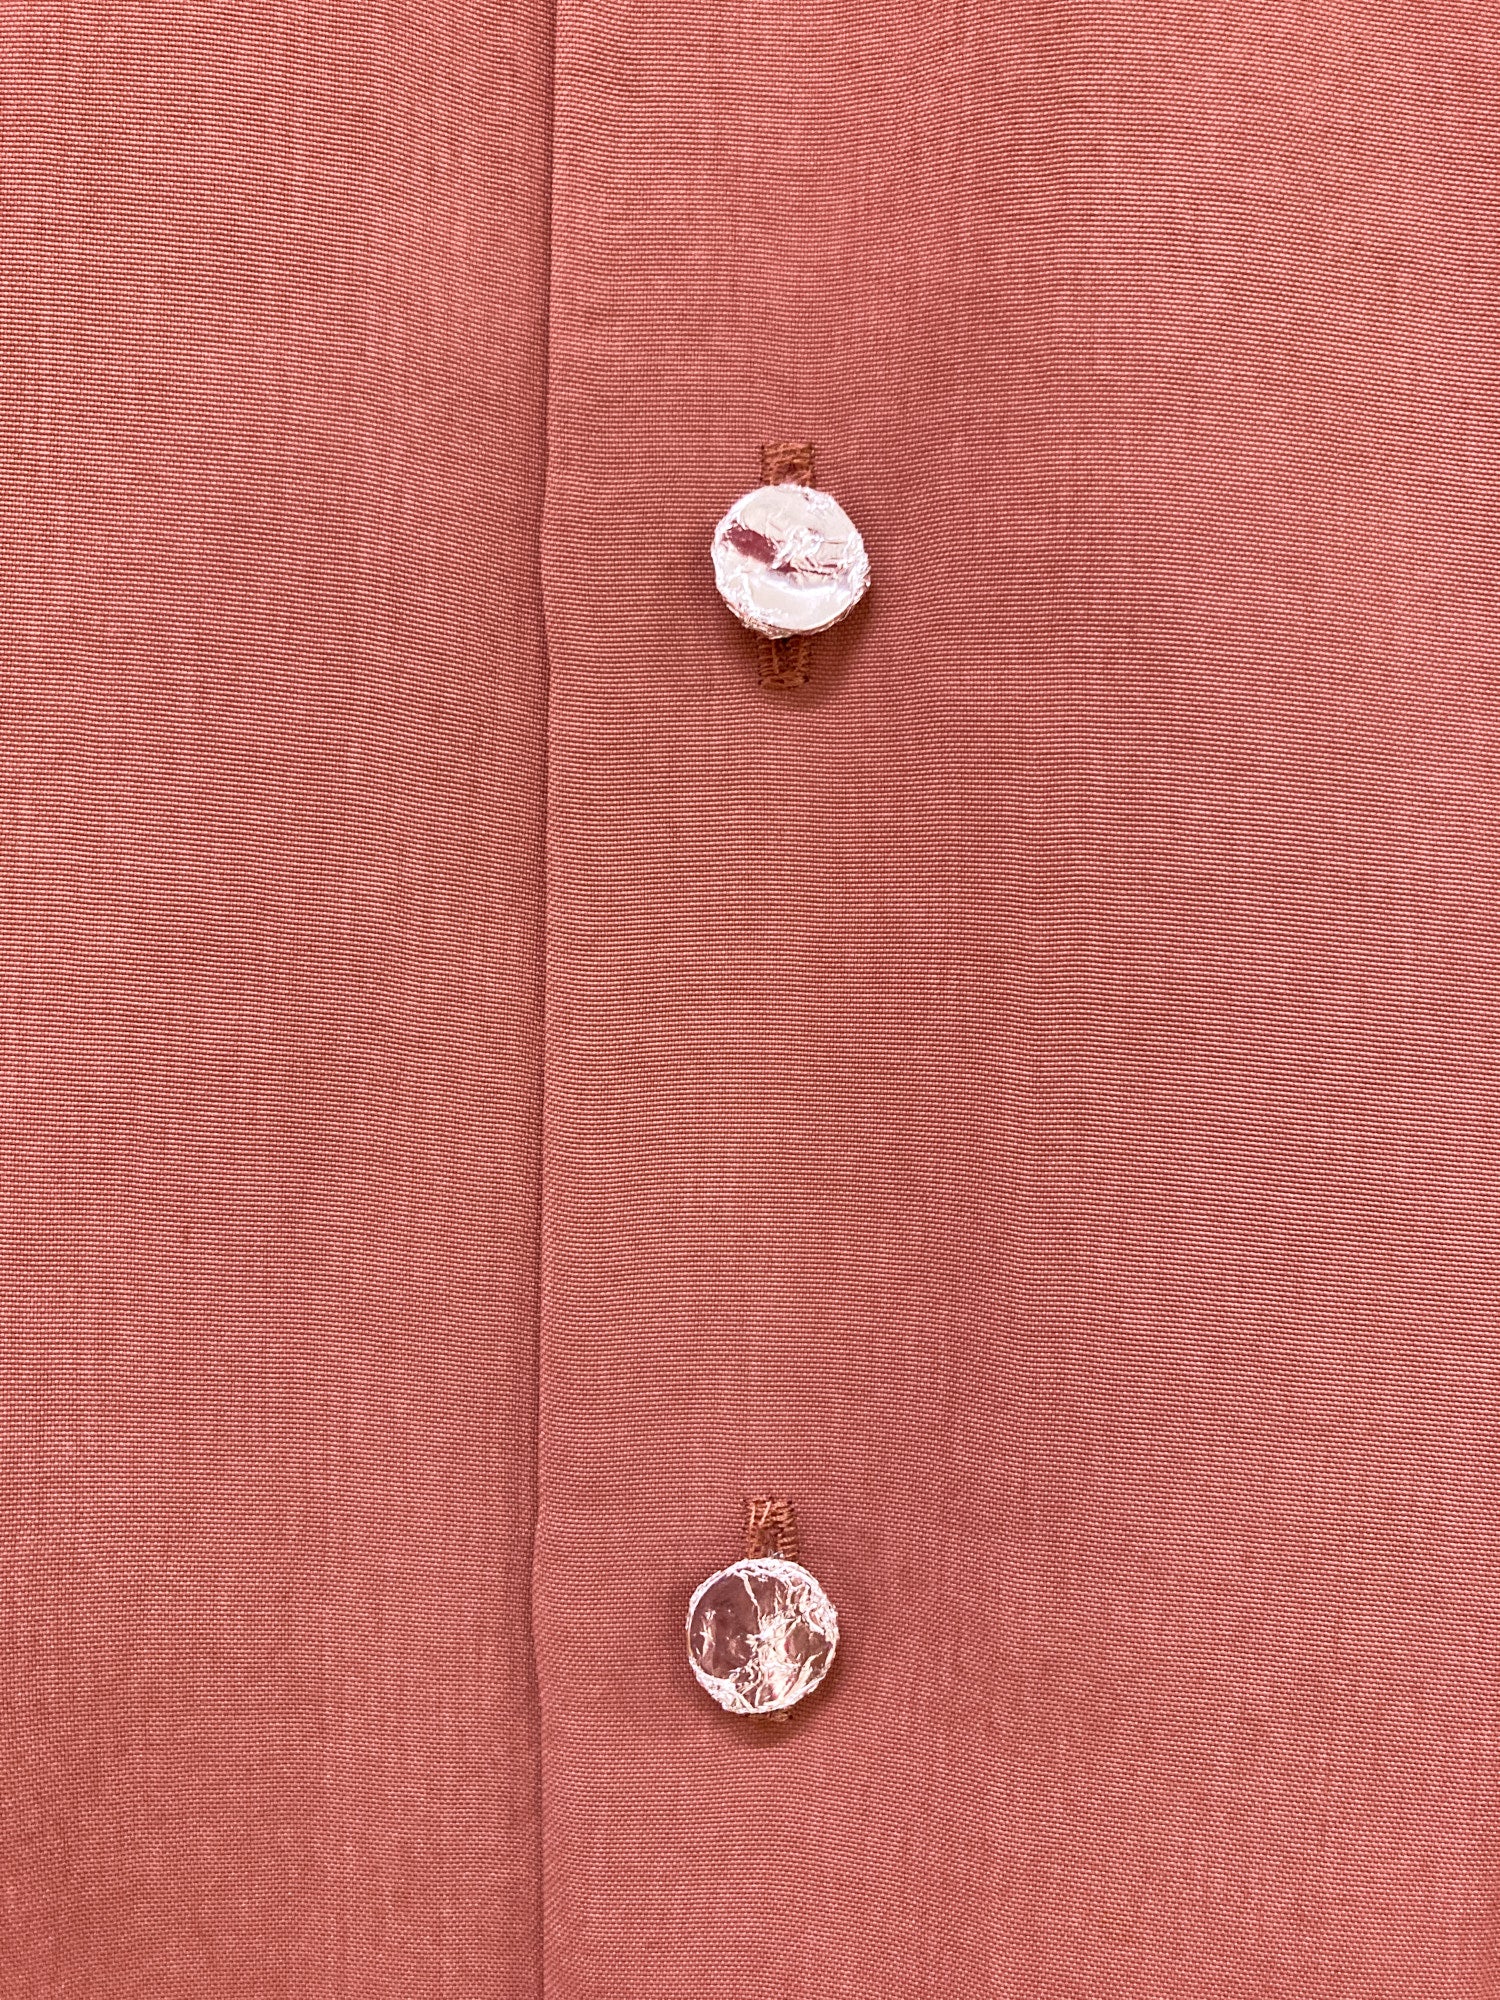 Jean Paul Gaultier Homme 1990s antique rose nylon shirt with pearl buttons - 48